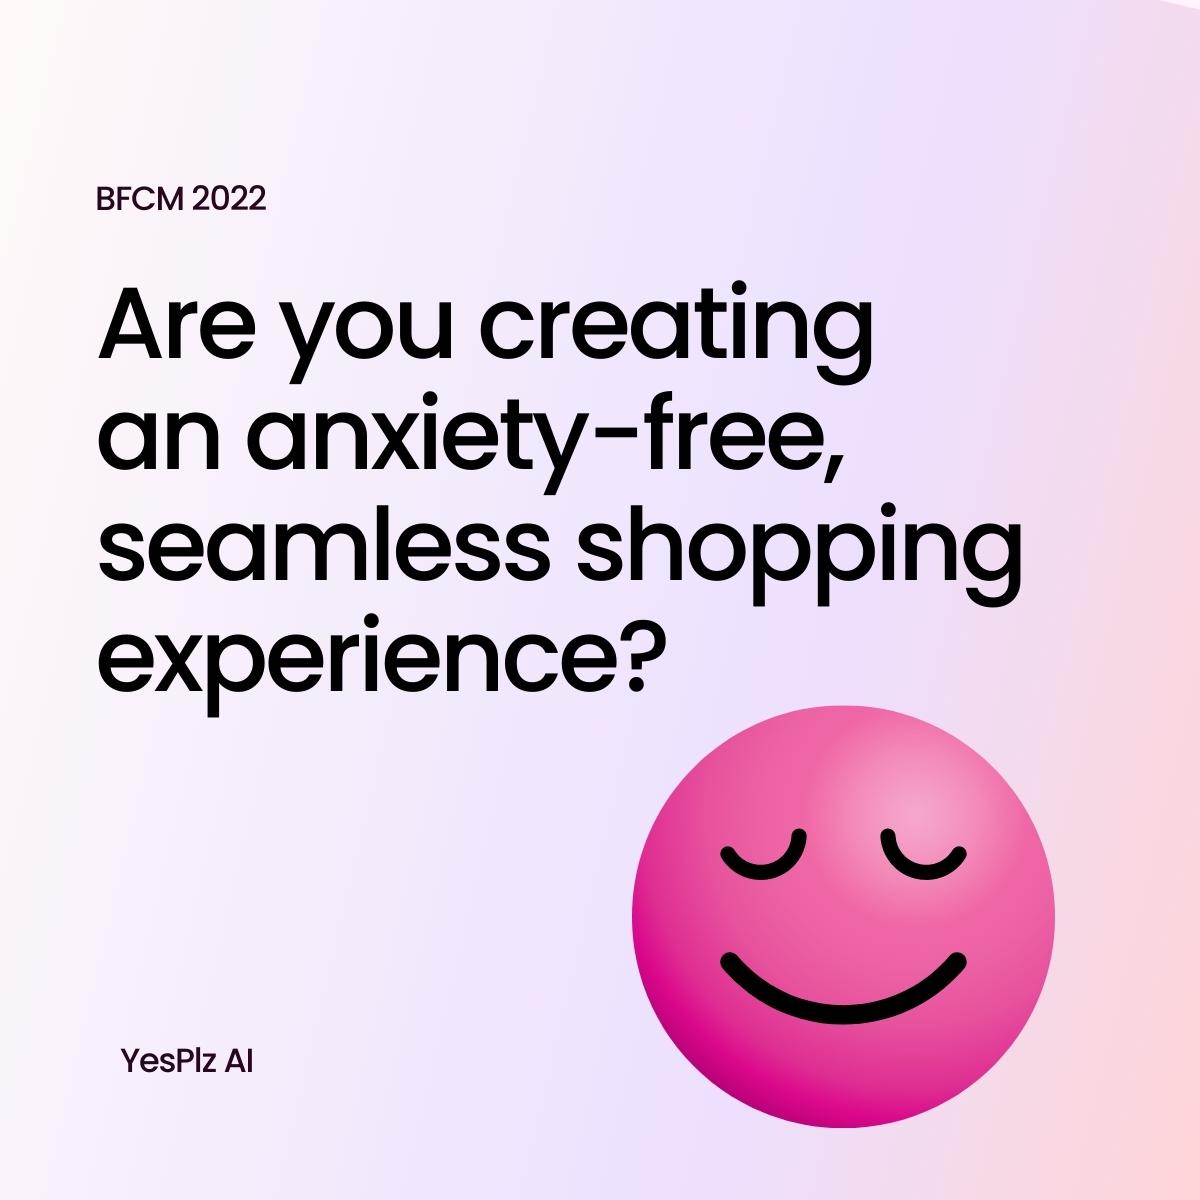 Are you creating anxiety free shopping experiences for BFCM 2022?